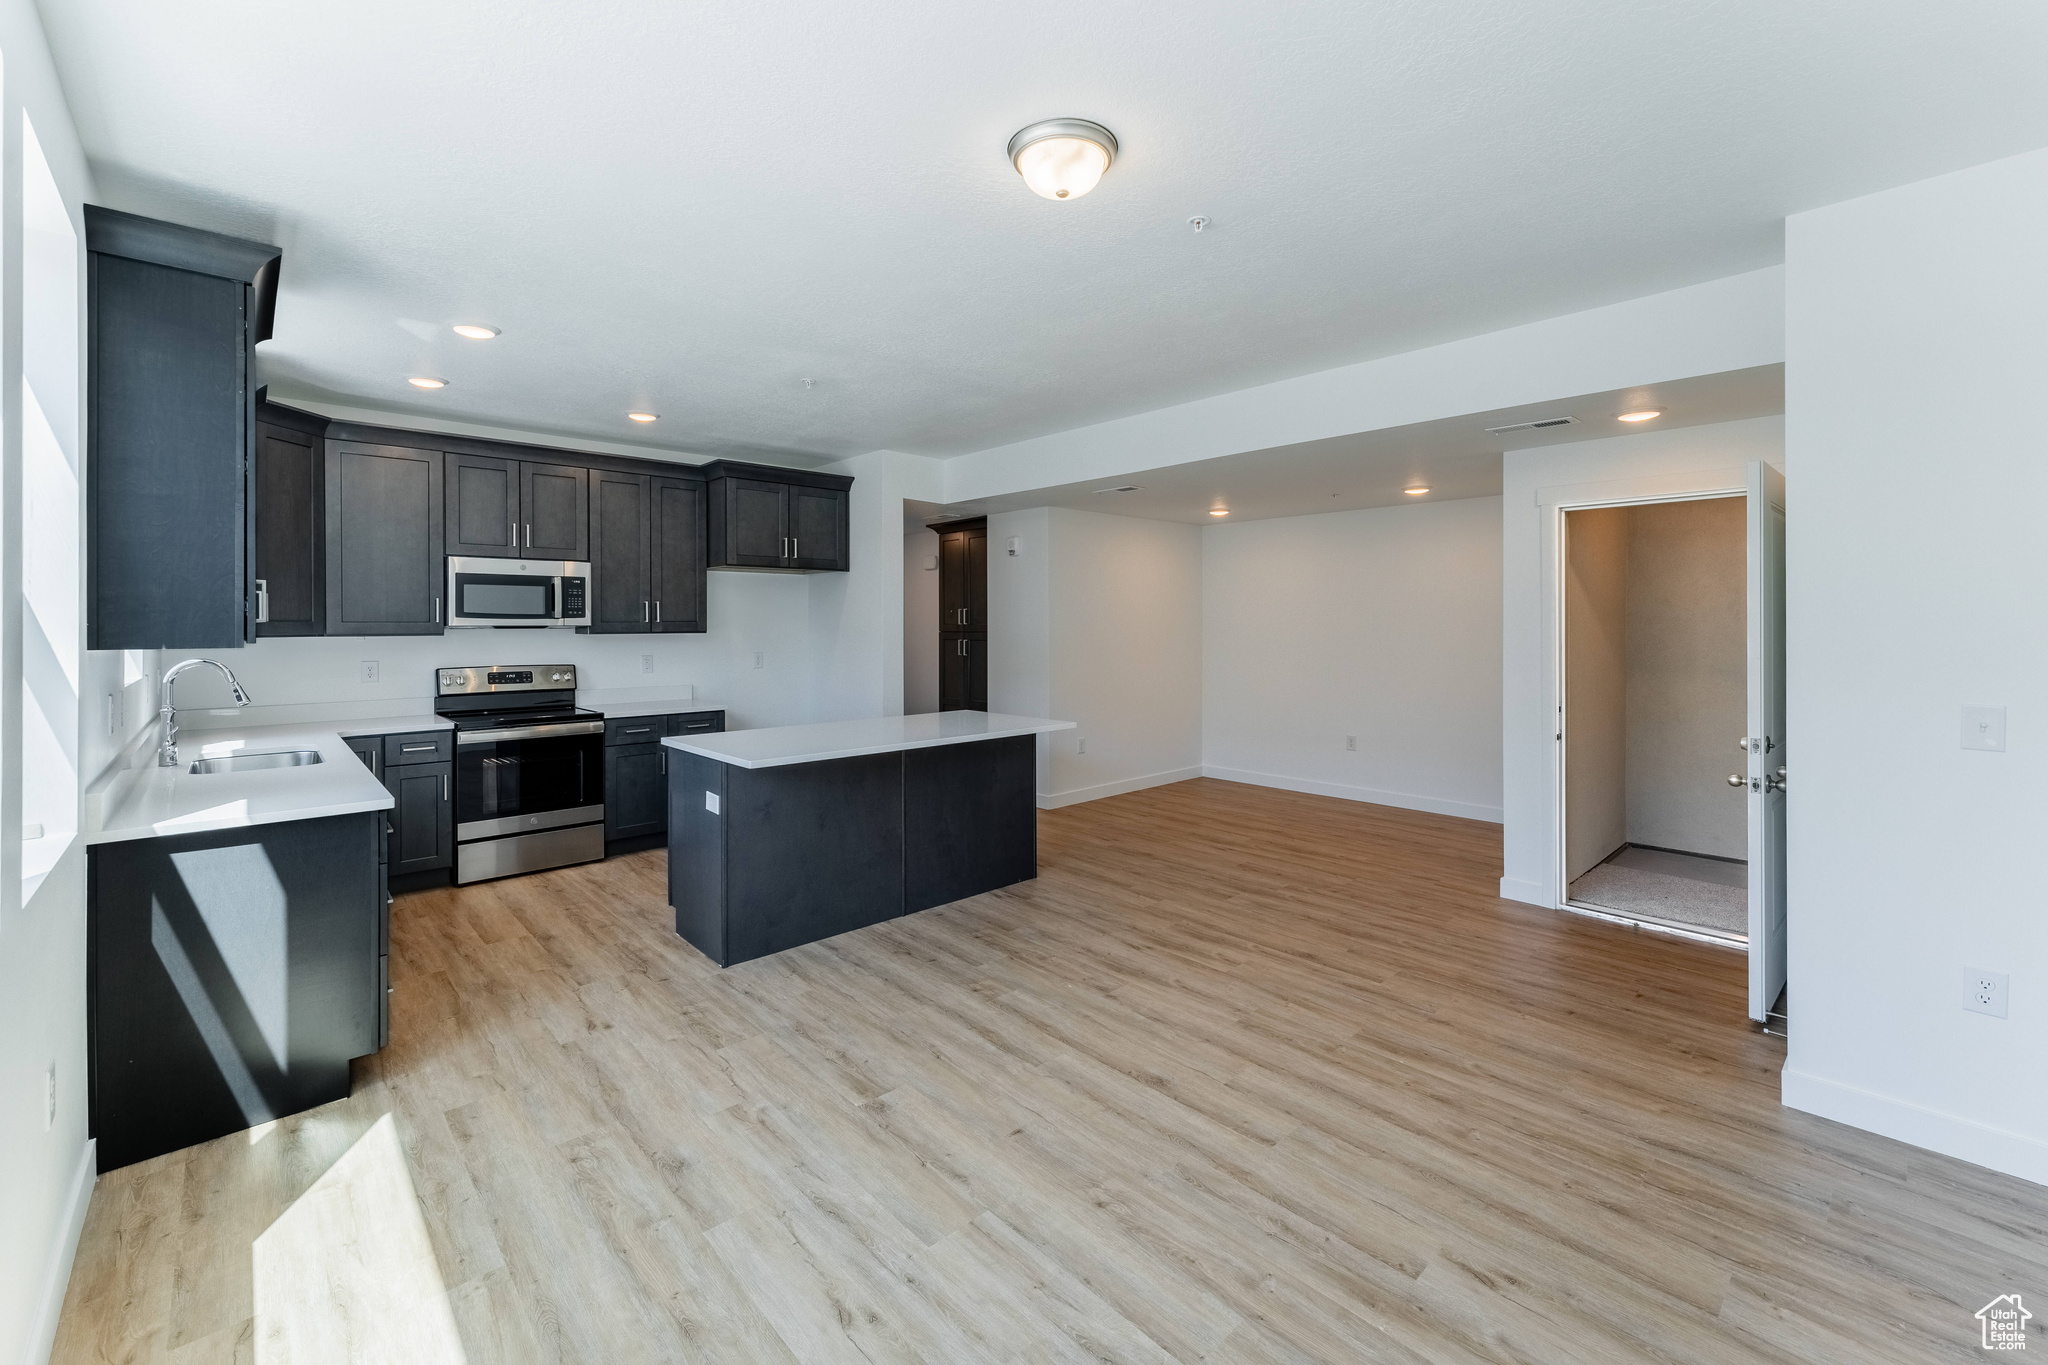 Kitchen with a center island, appliances with stainless steel finishes, light hardwood / wood-style flooring, and sink